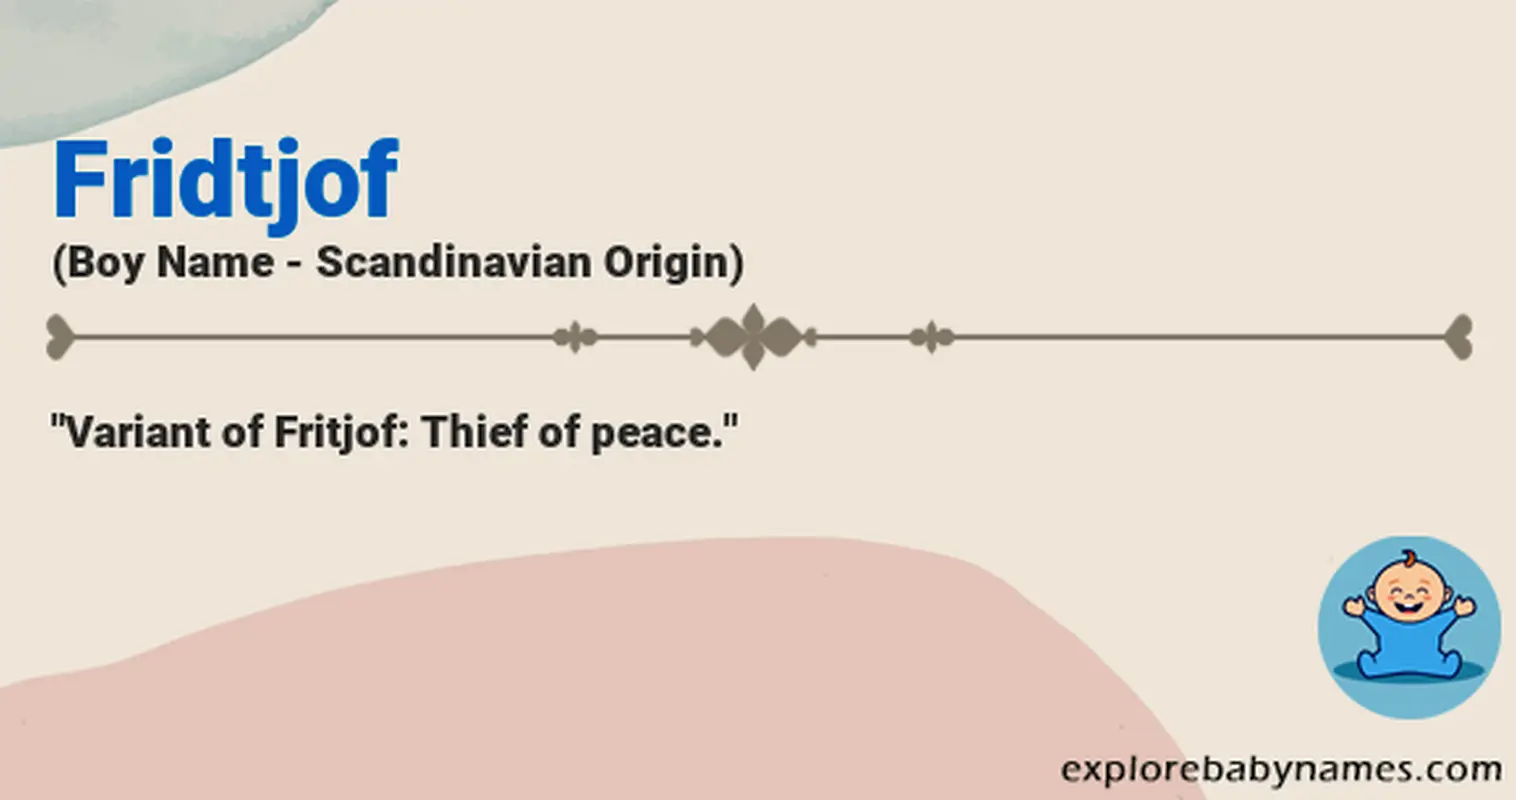 Meaning of Fridtjof